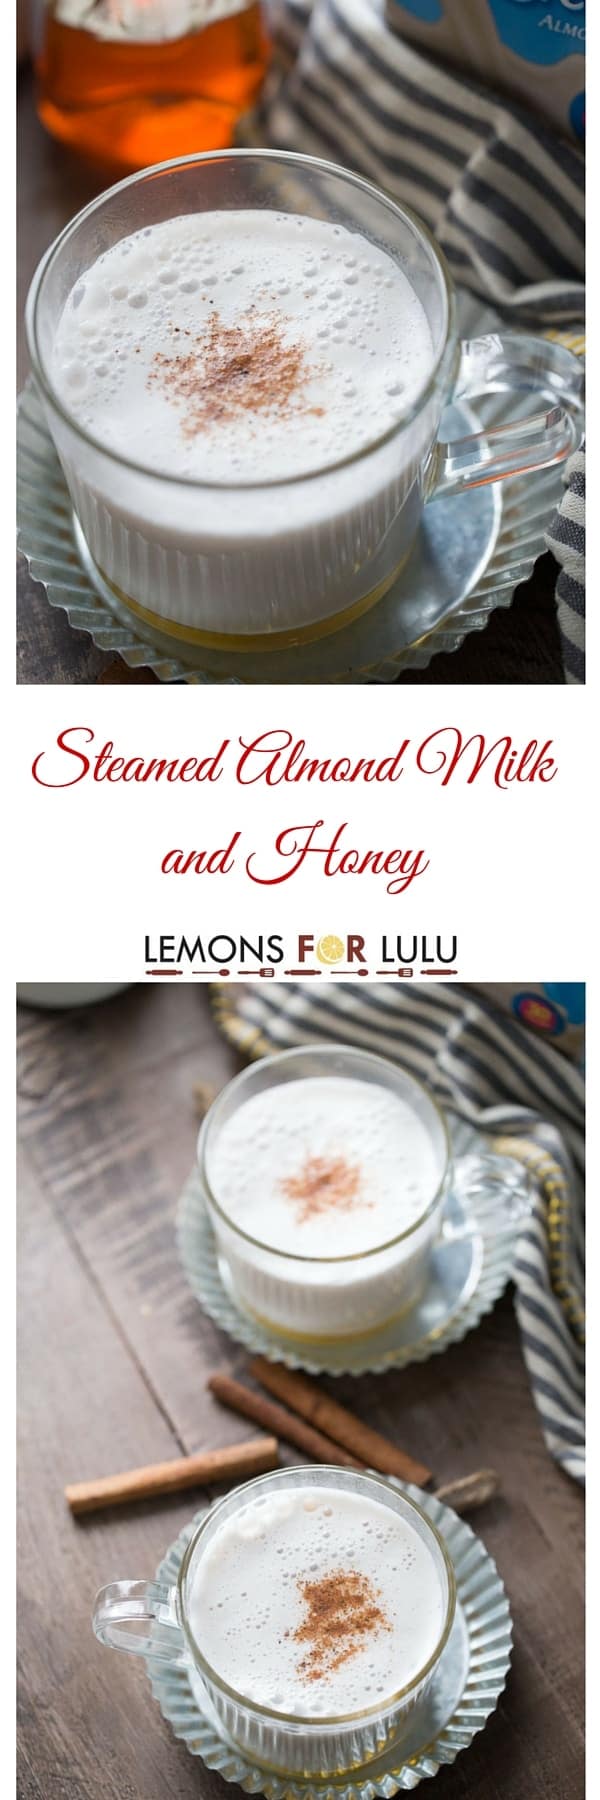 Nothing is quite as comforting as a mug of warm milk. This simple recipe is made with cinnamon infused almond milk that is poured over honey! This beverage is sweet, calming and delicious! lemonsforlulu.com